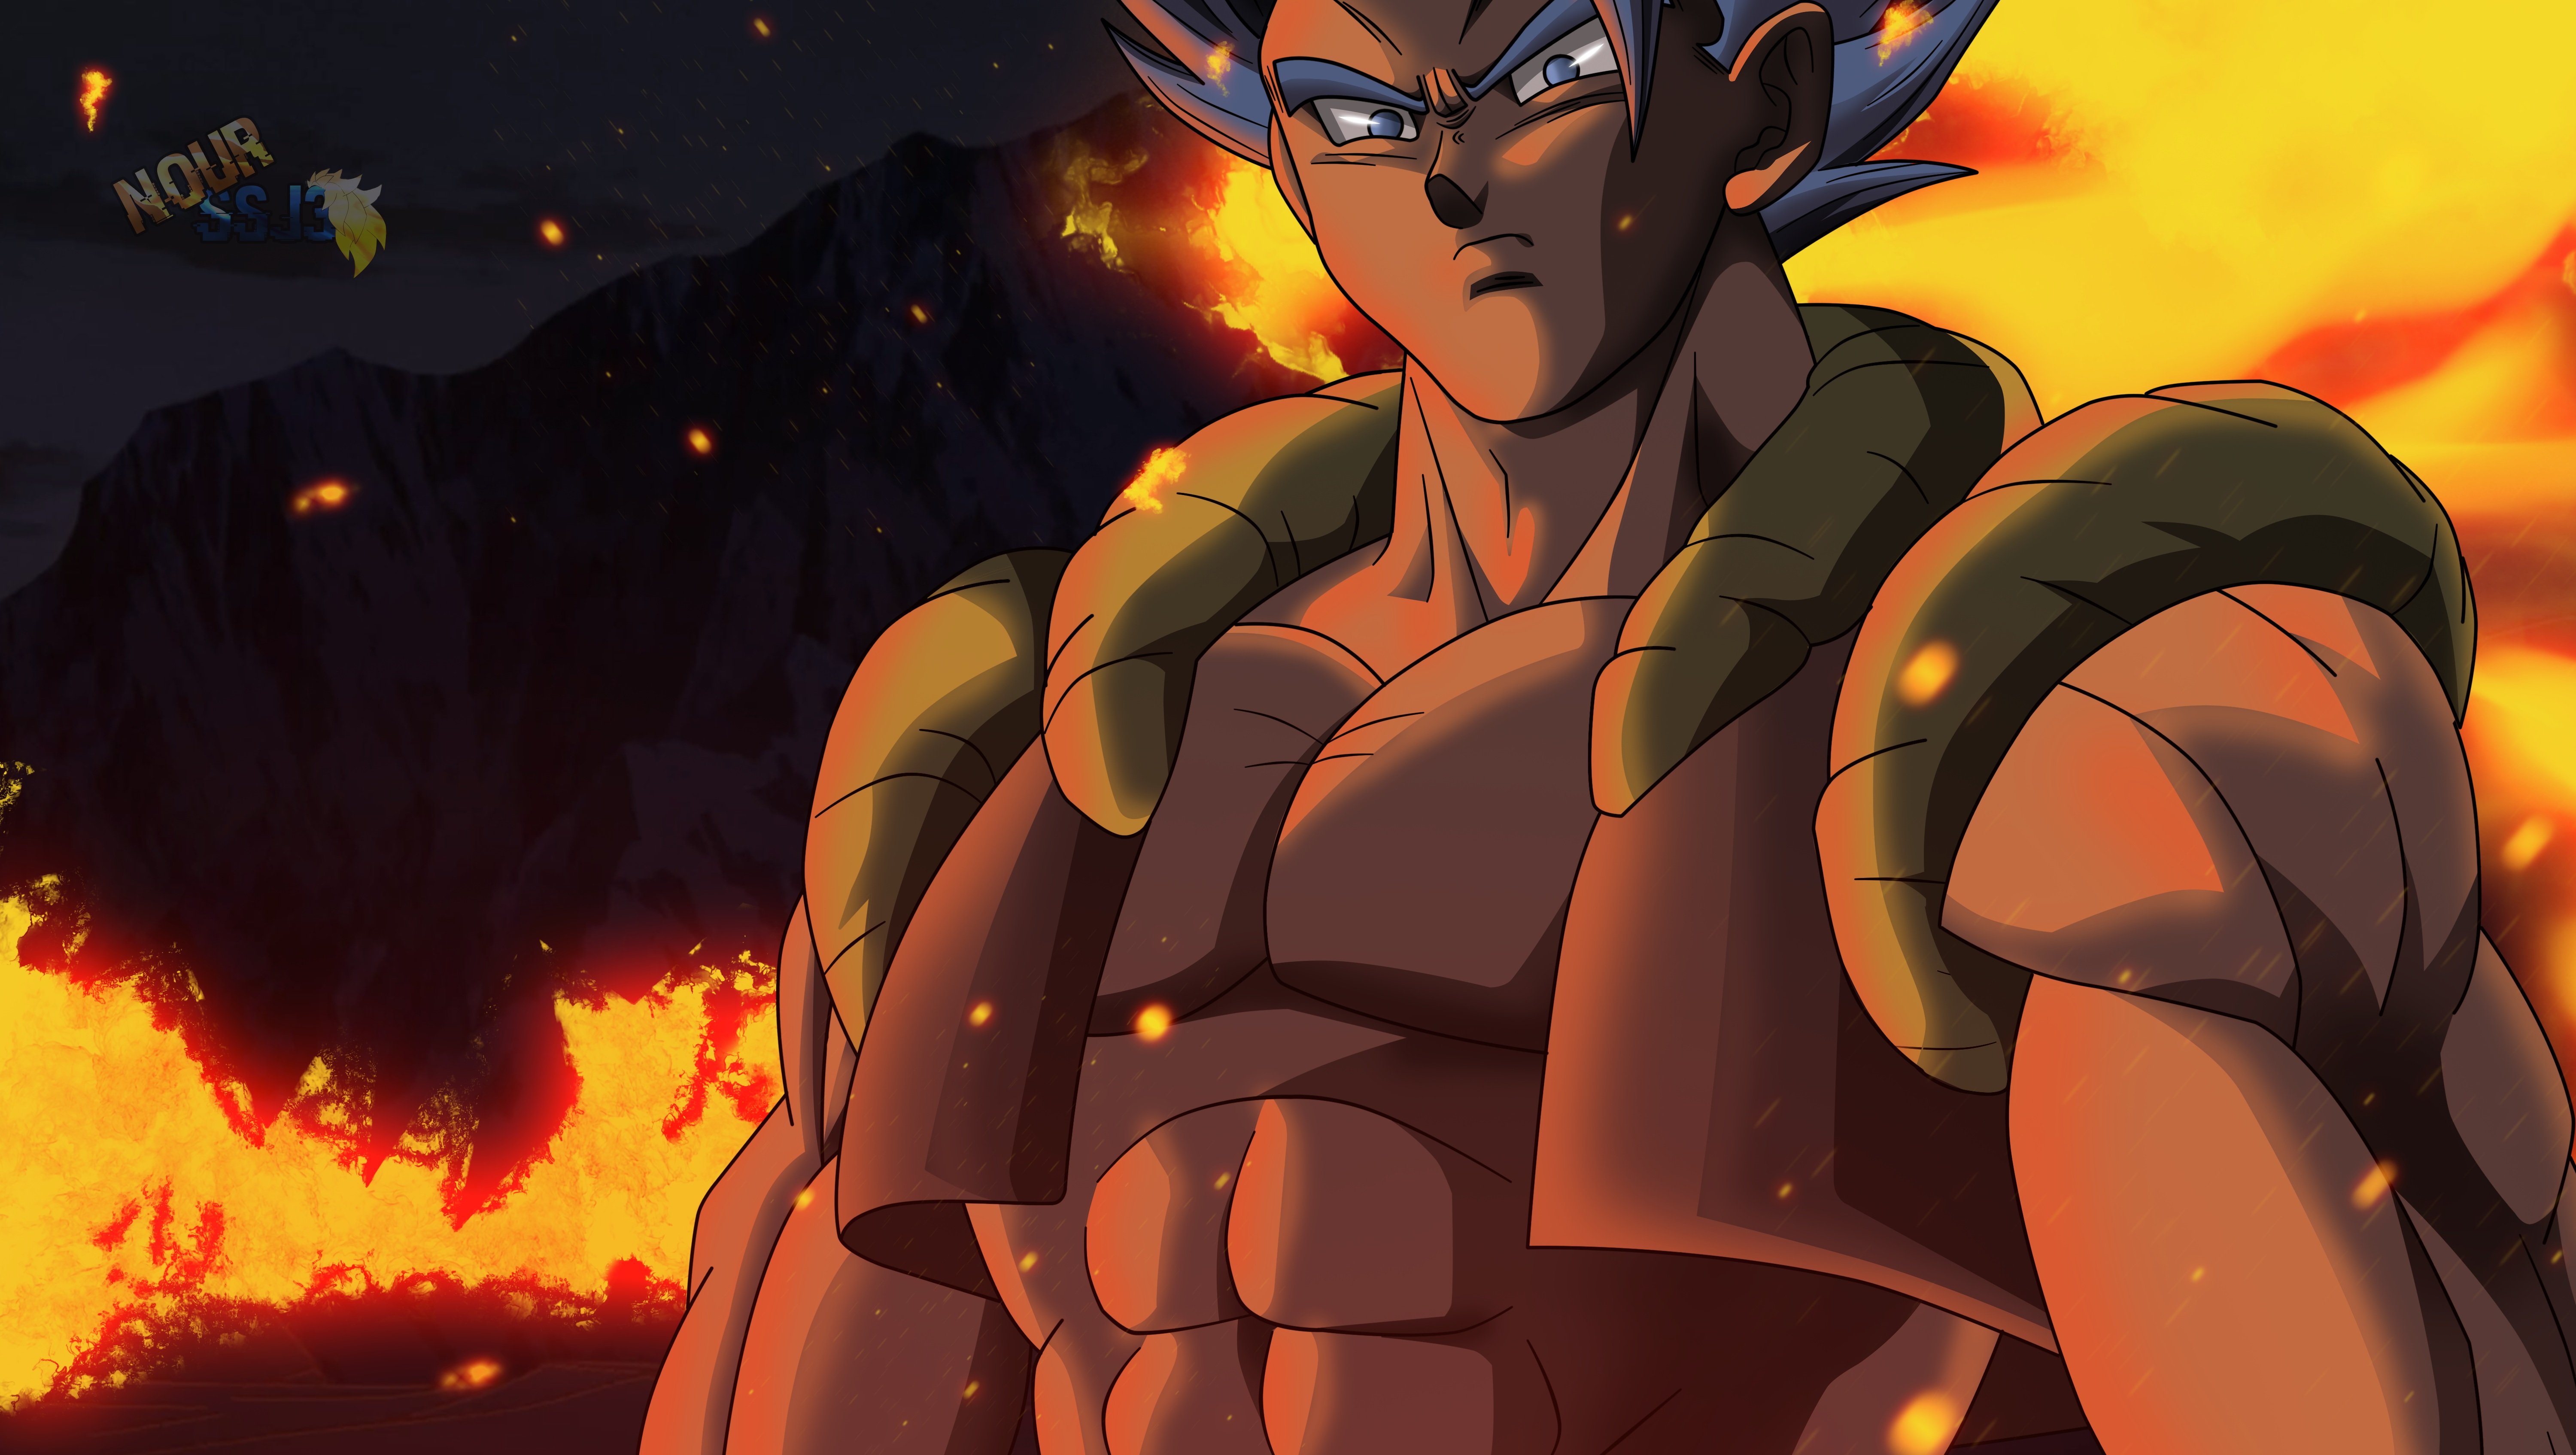 Gogeta (Dragon Ball) wallpaper for desktop, download free Gogeta (Dragon Ball) picture and background for PC